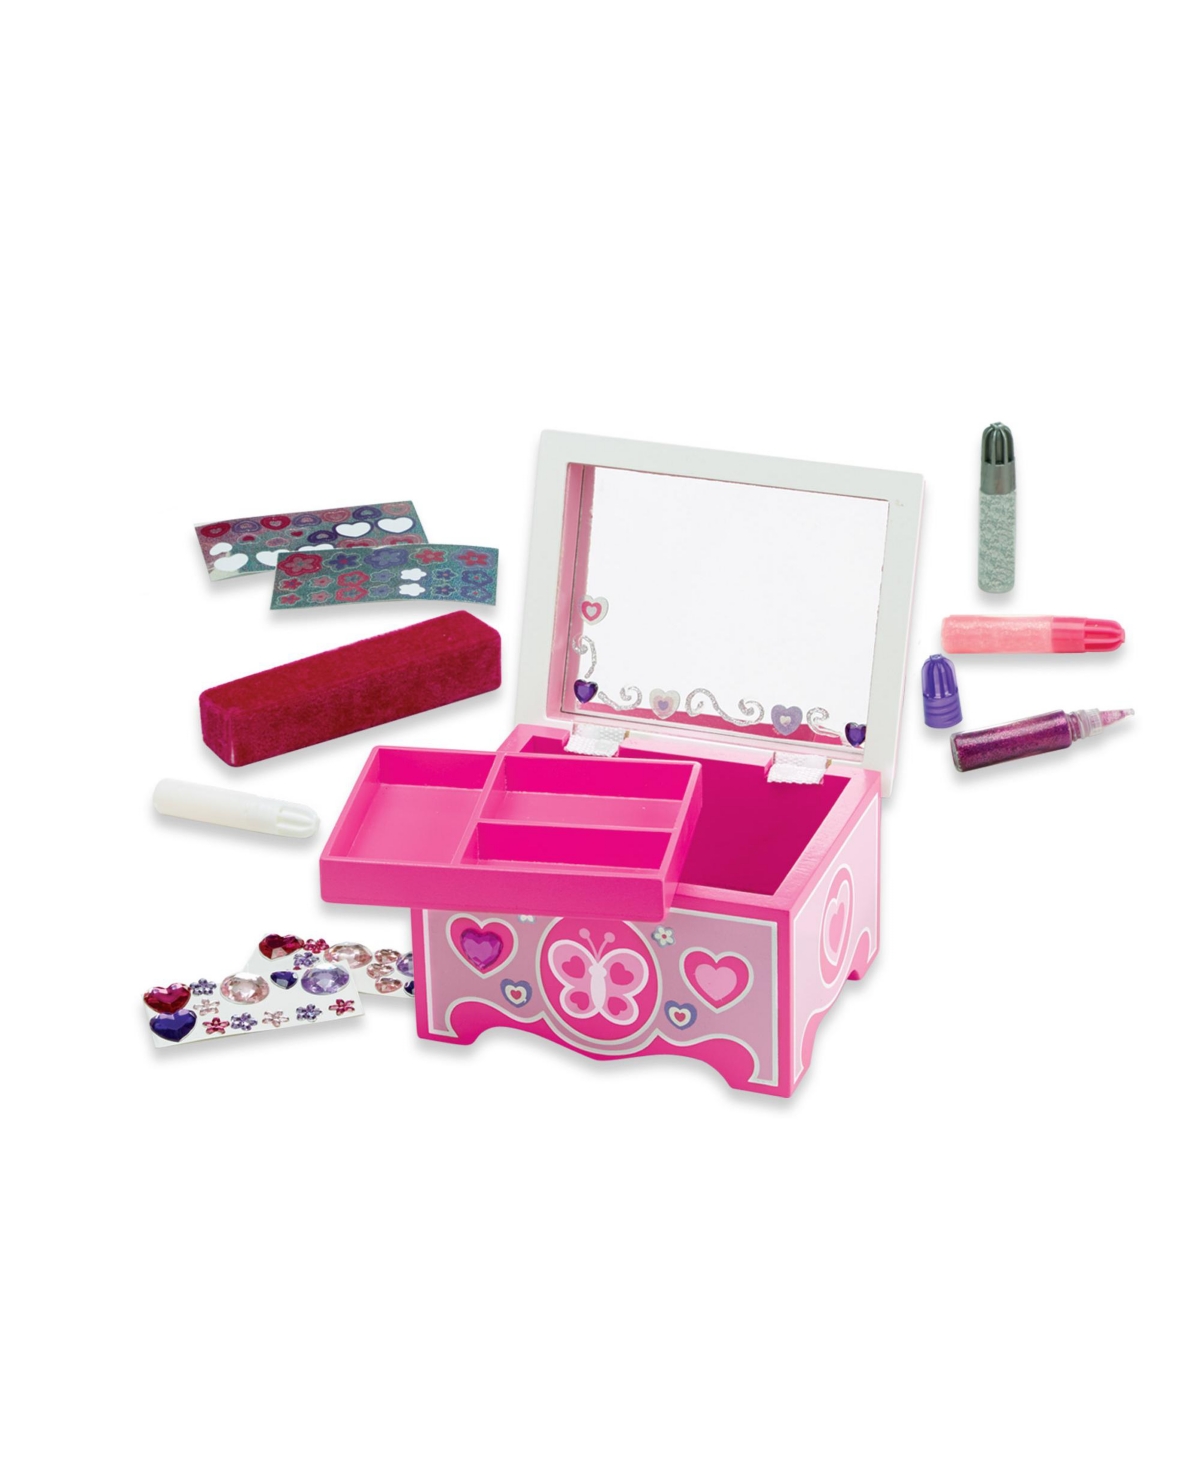 Kids' Decorate Your Own Jewelry Box Kit